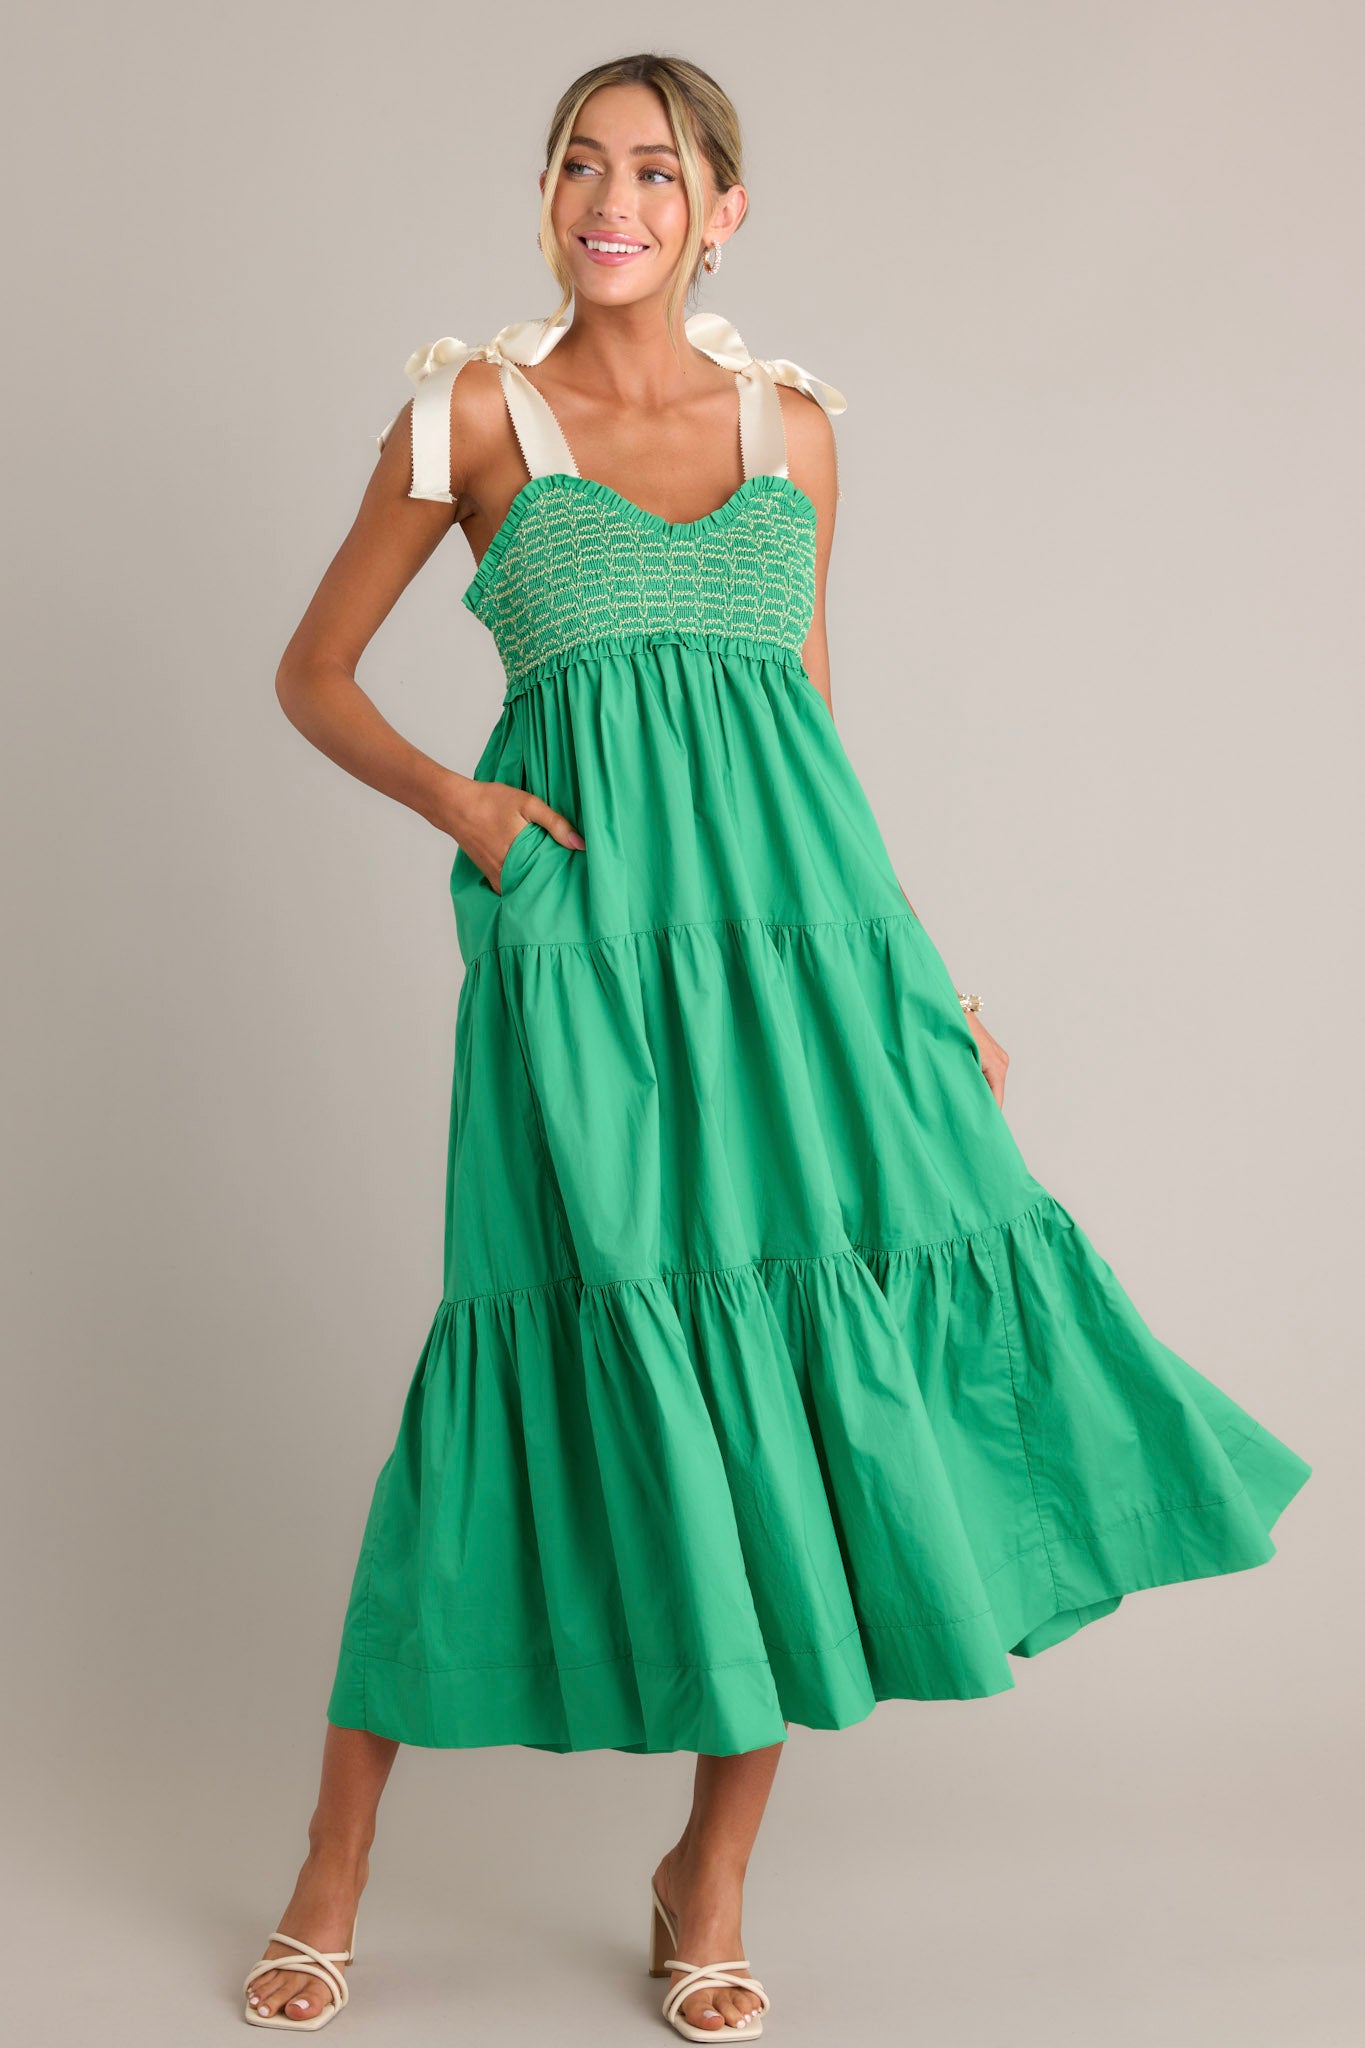 This green maxi dress features a v-neckline, thick self-tie straps, a fully smocked bodice, functional hip pockets, and a tiered design.